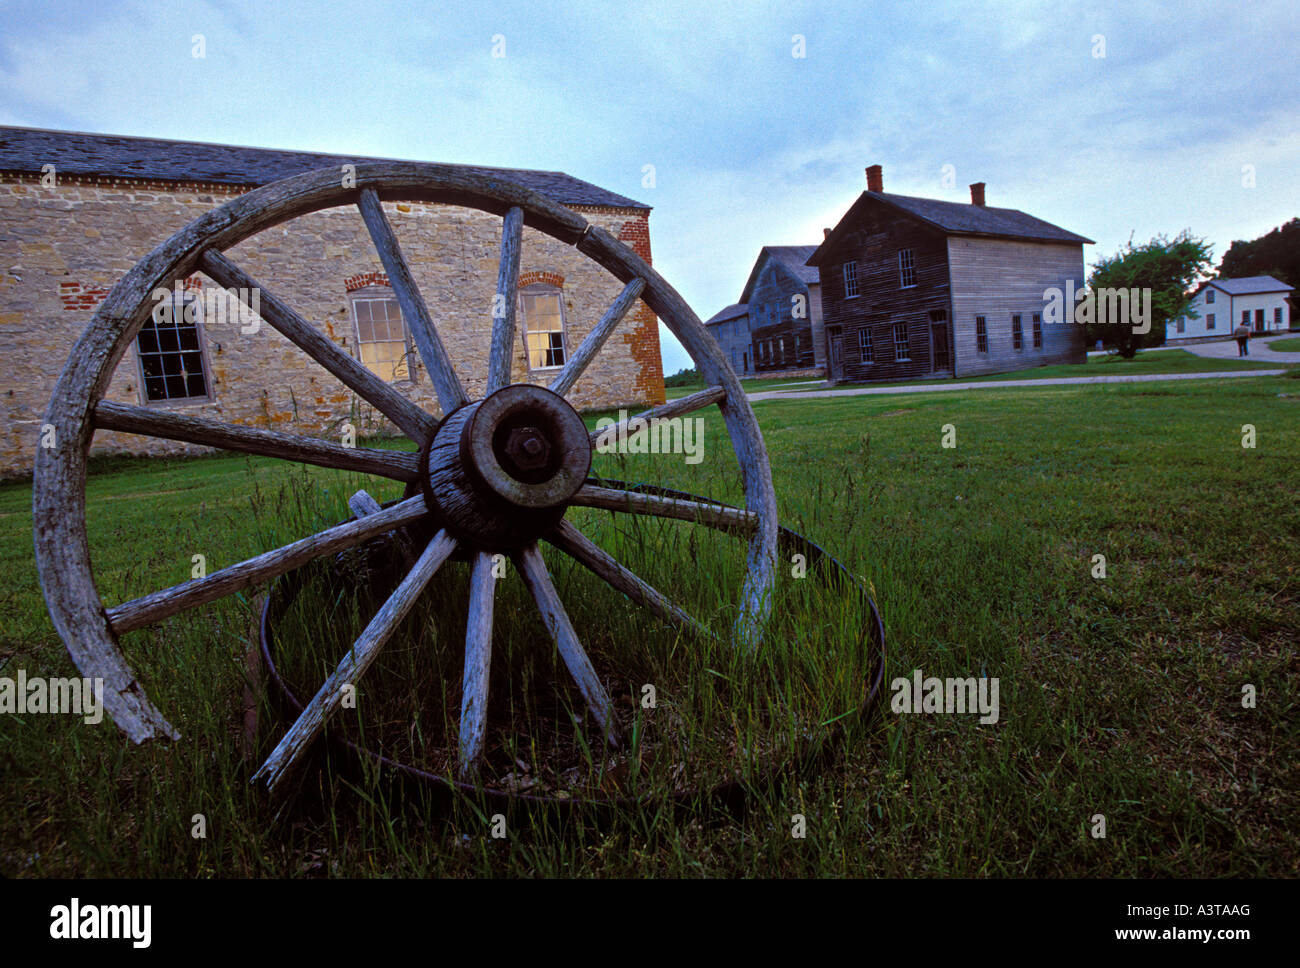 A WAGON WHEEL SITS AMONG NINETEENTH CENTURY BUILDINGS AT FAYETTE STATE HISTORIC PARK ON THE GARDEN PENINSULA Stock Photo